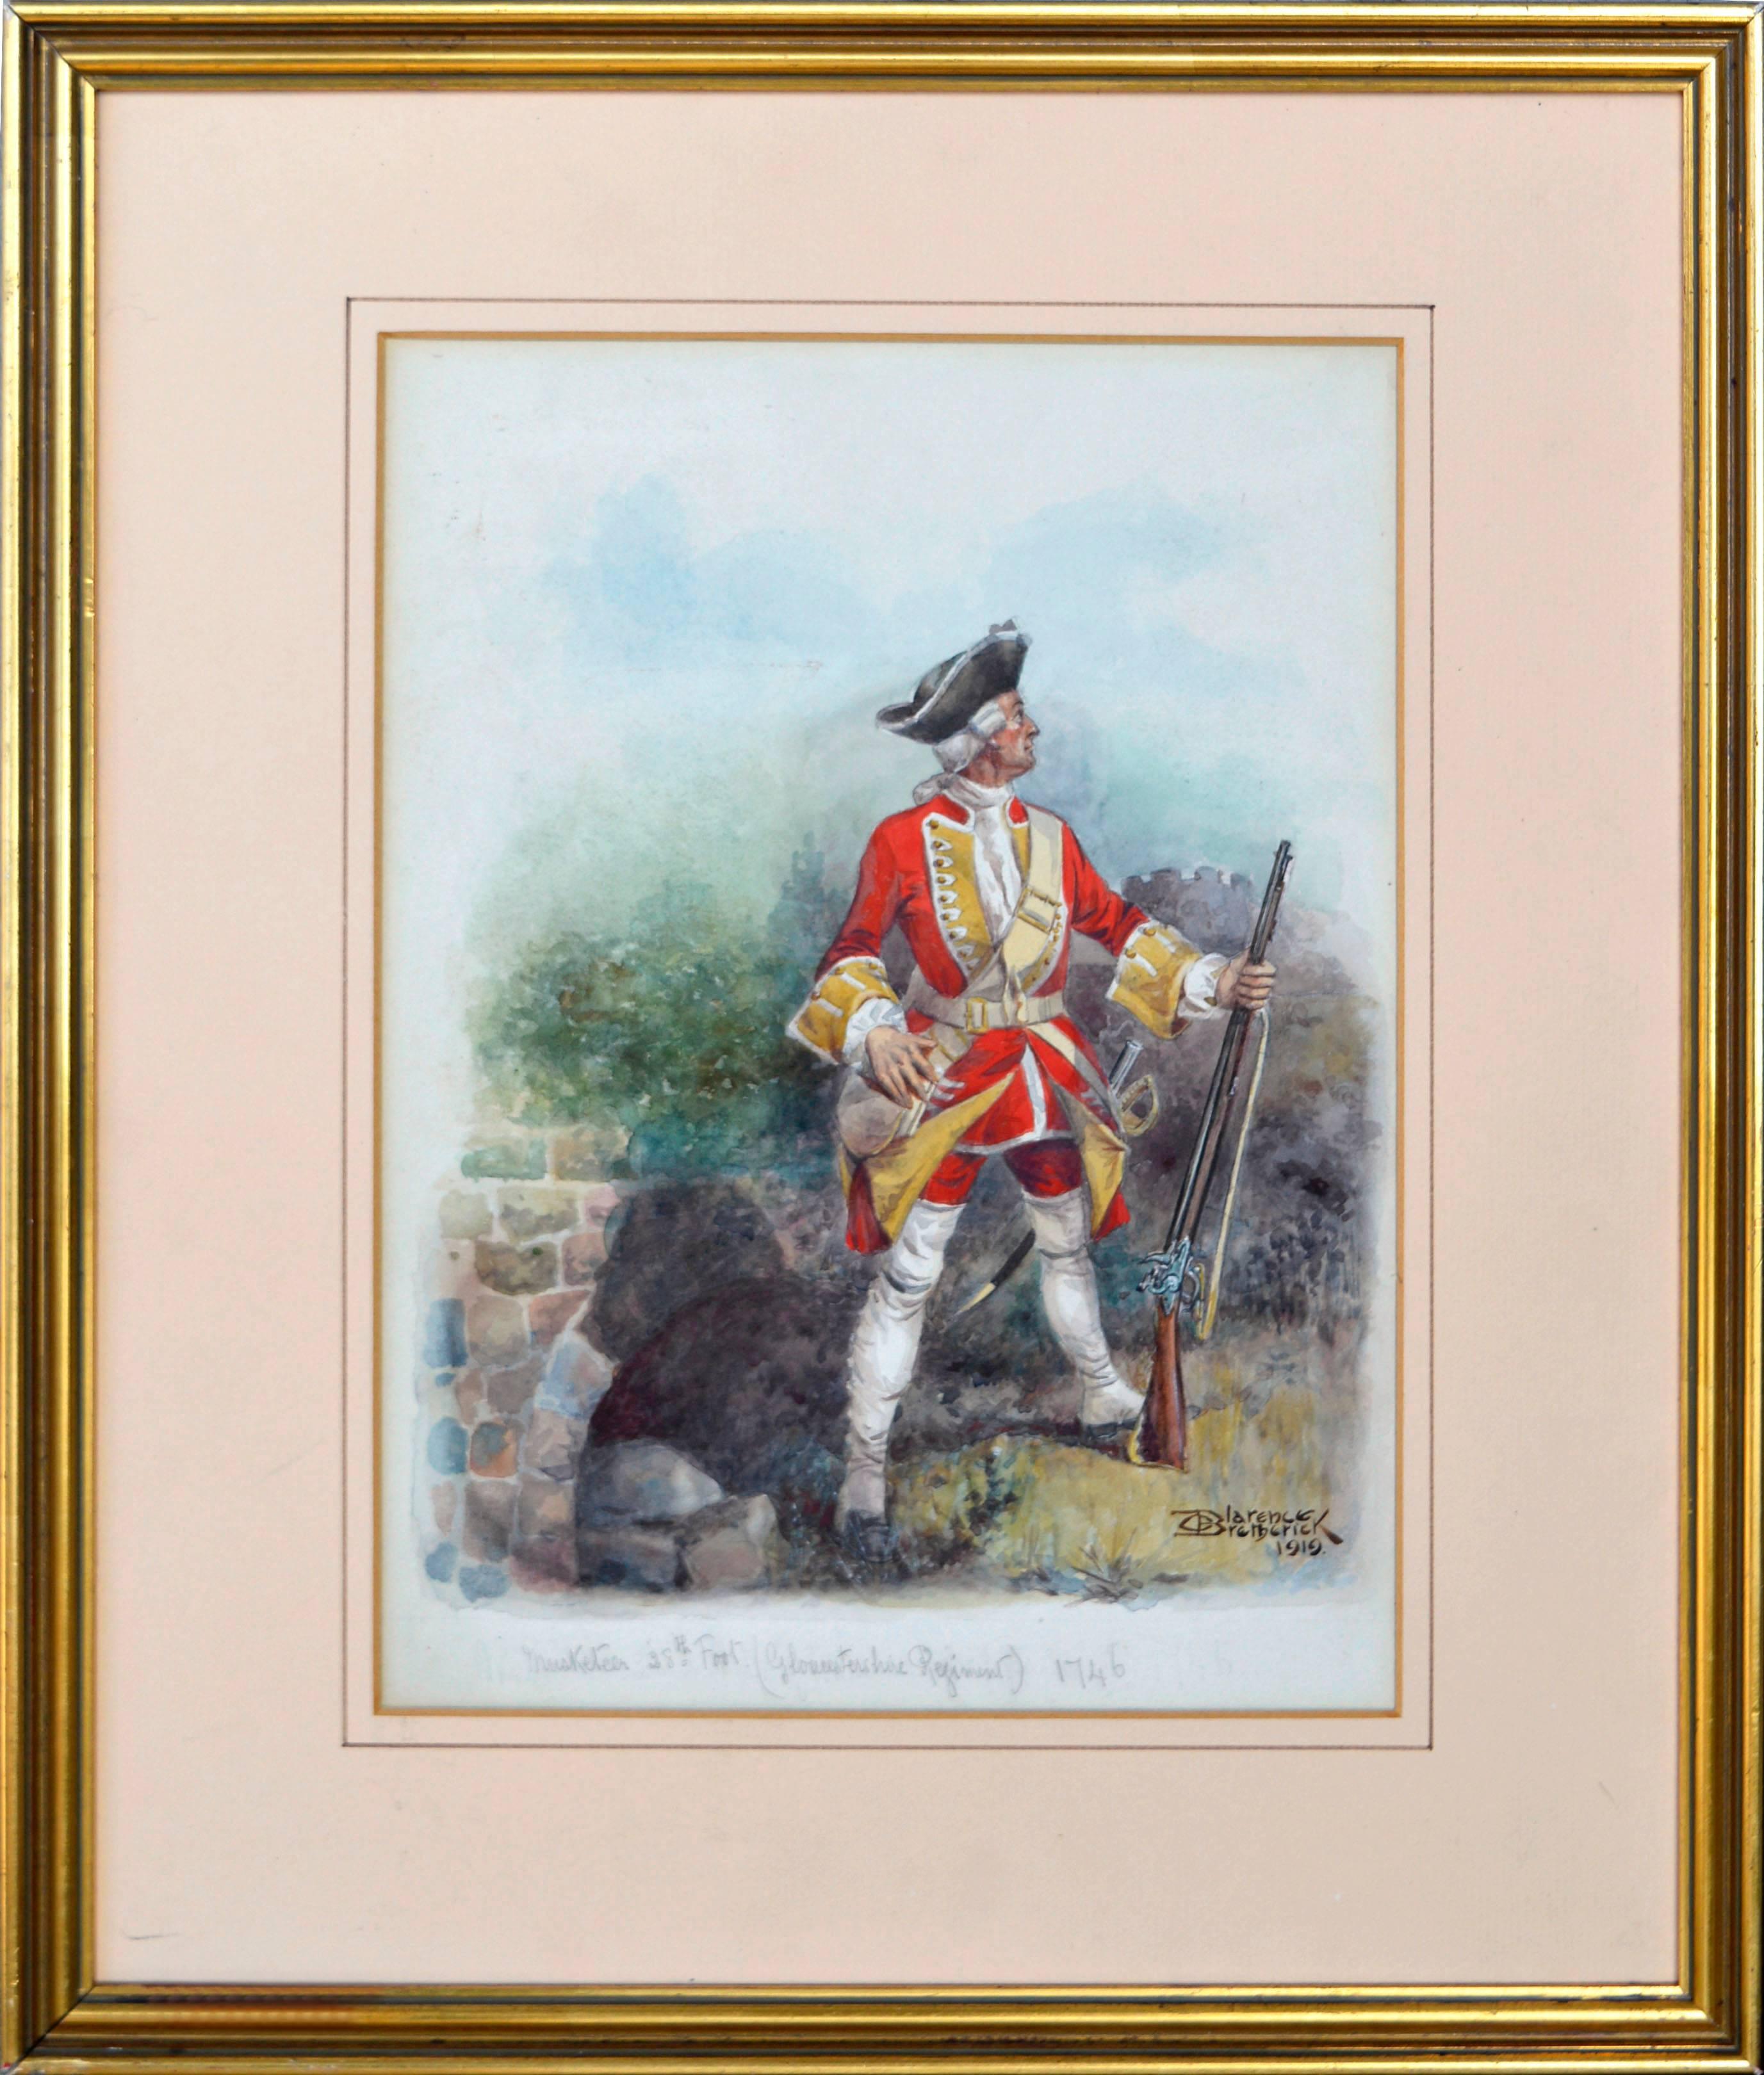 Clarence F. Bretherick Figurative Art - Musketeer 28th Foot (Gloucestershire Regiment) 1746 in Watercolor on Paper